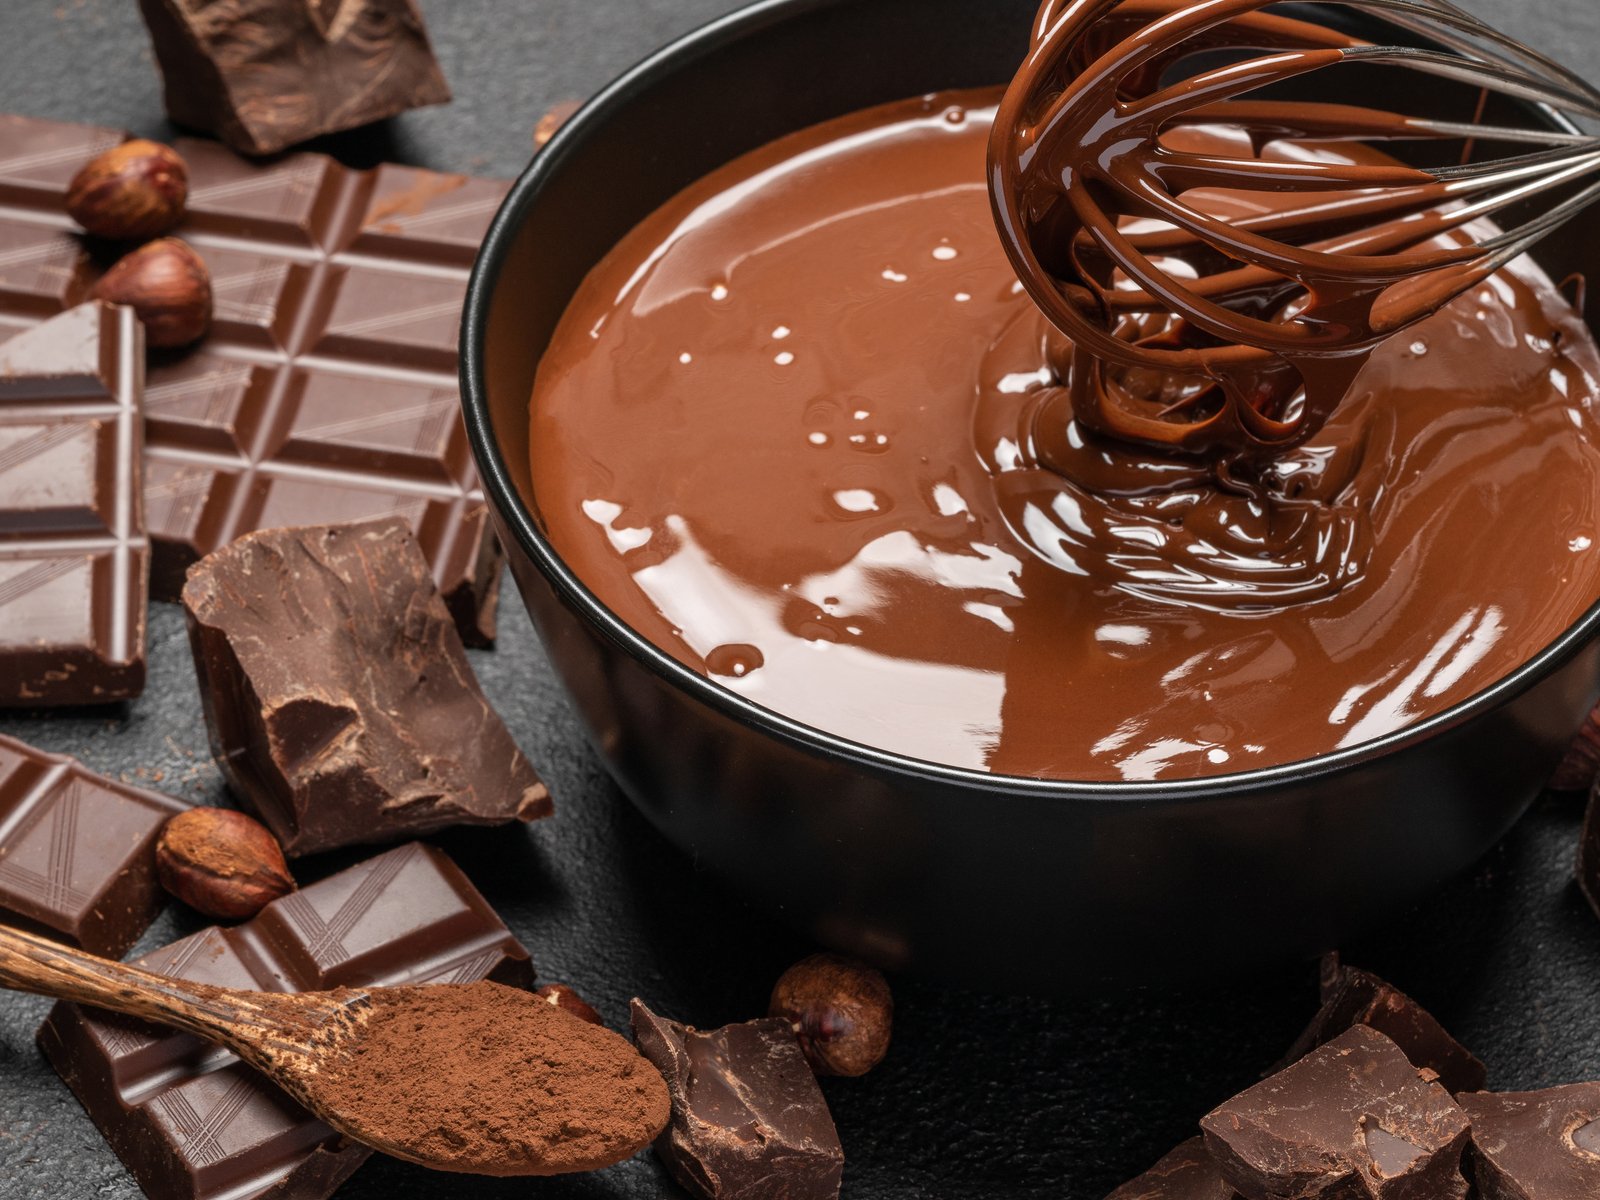 Indulge that special person in your life with one of our favourite chocolate recipes.